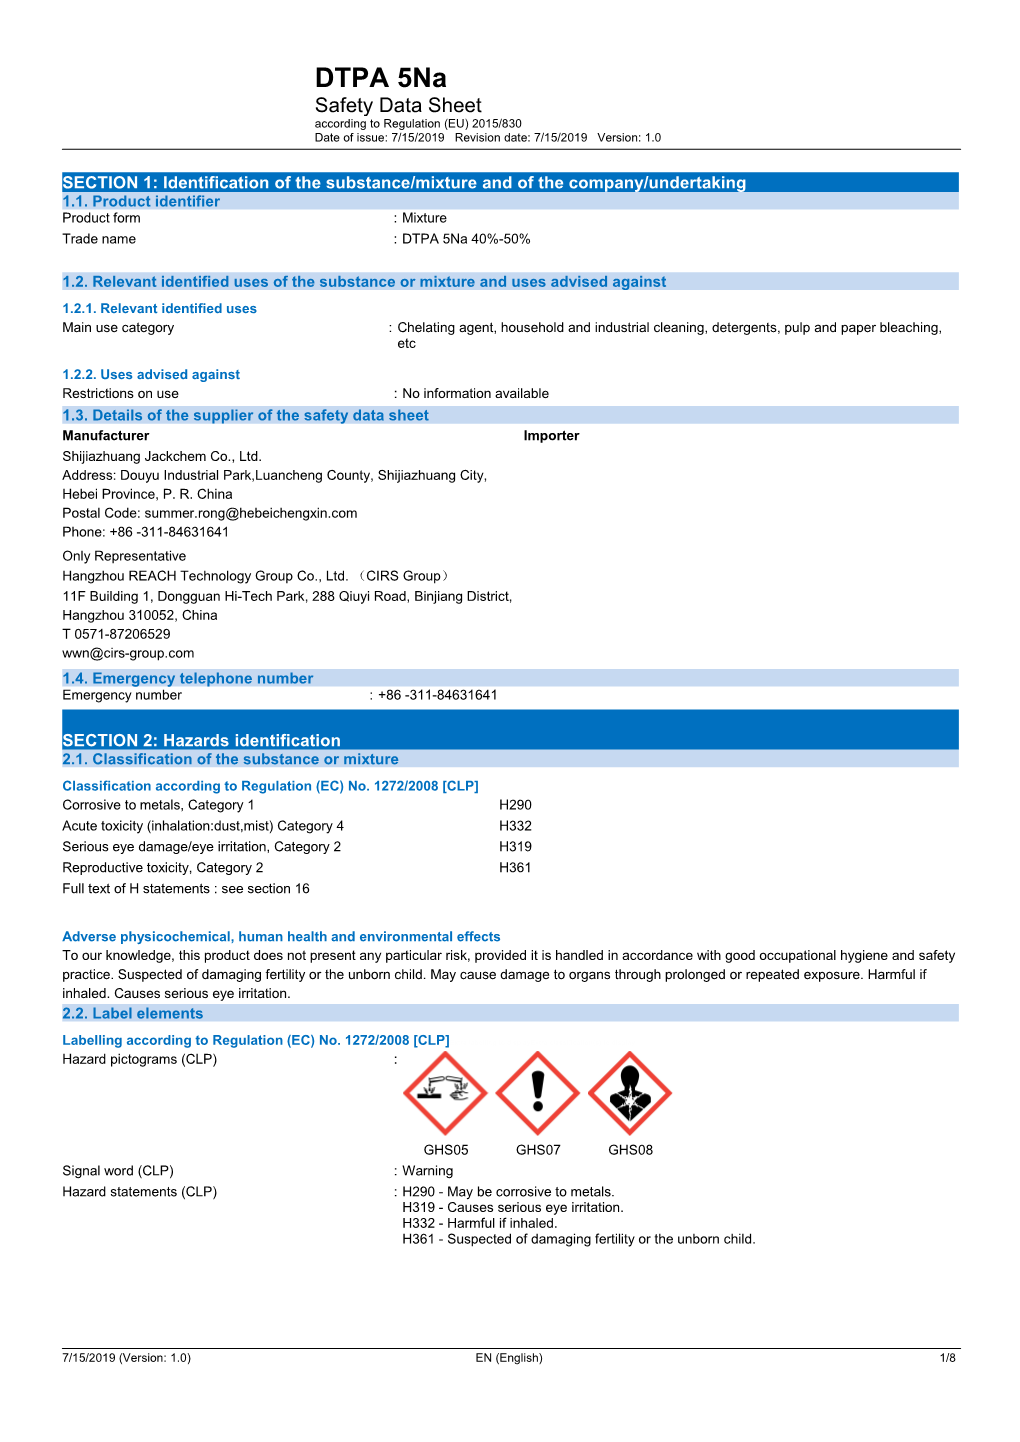 DTPA 5Na Safety Data Sheet According to Regulation (EU) 2015/830 Date of Issue: 7/15/2019 Revision Date: 7/15/2019 Version: 1.0